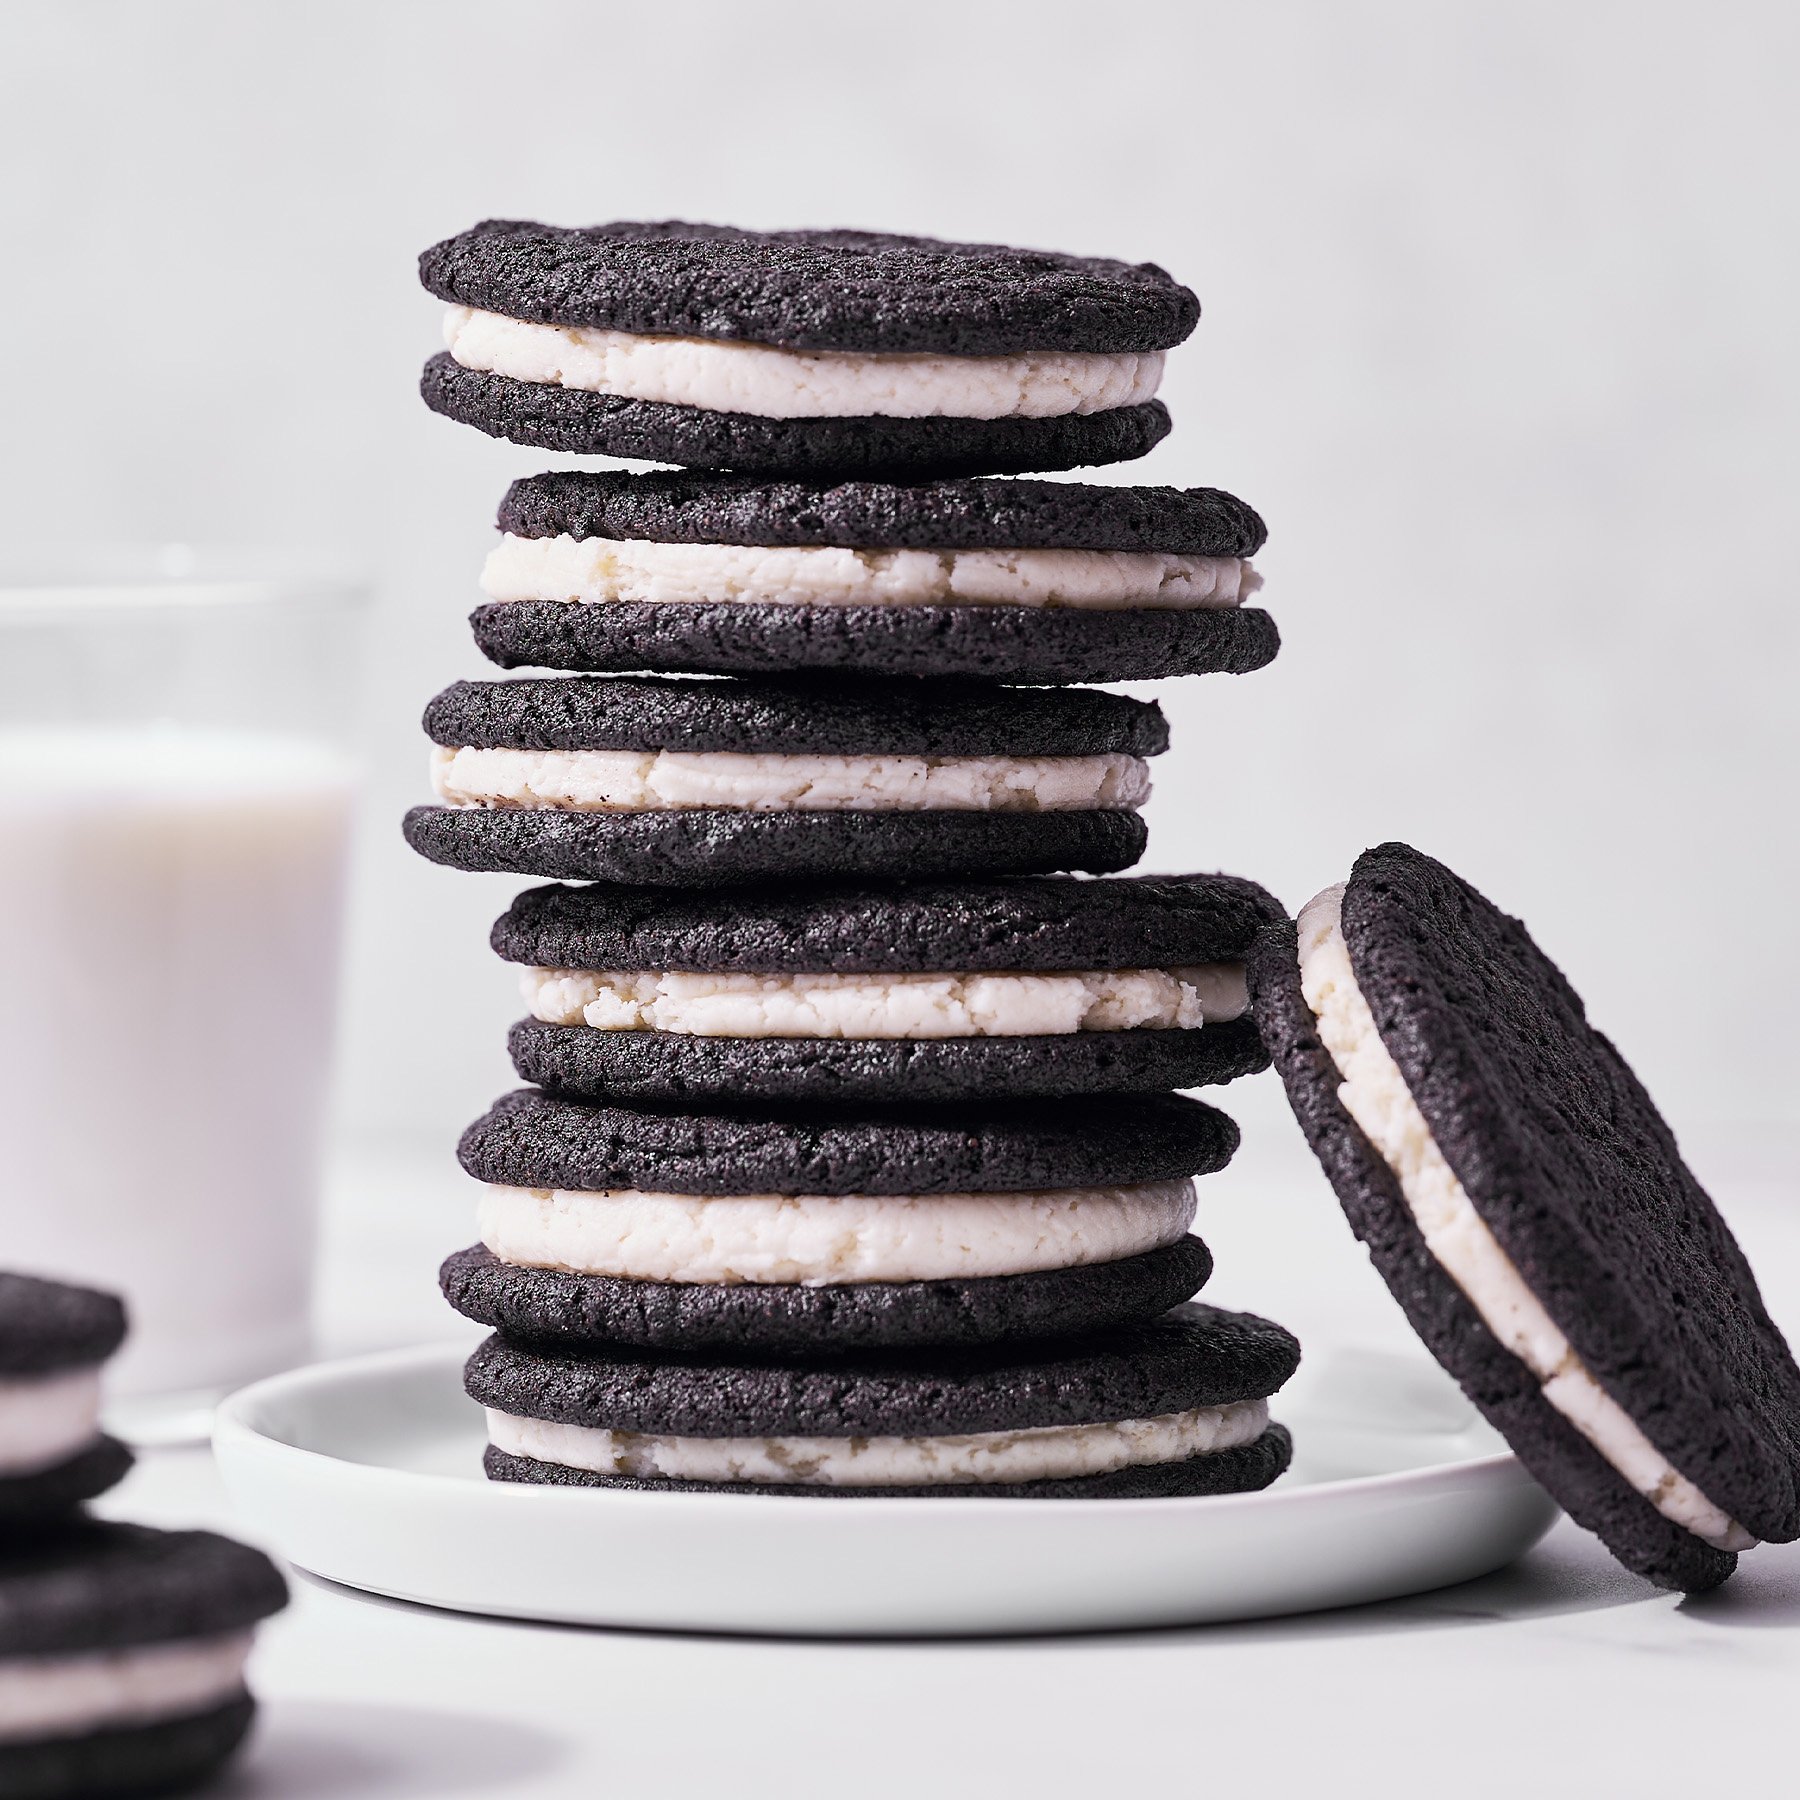 stack of homemade oreo cookies with a glass of milk